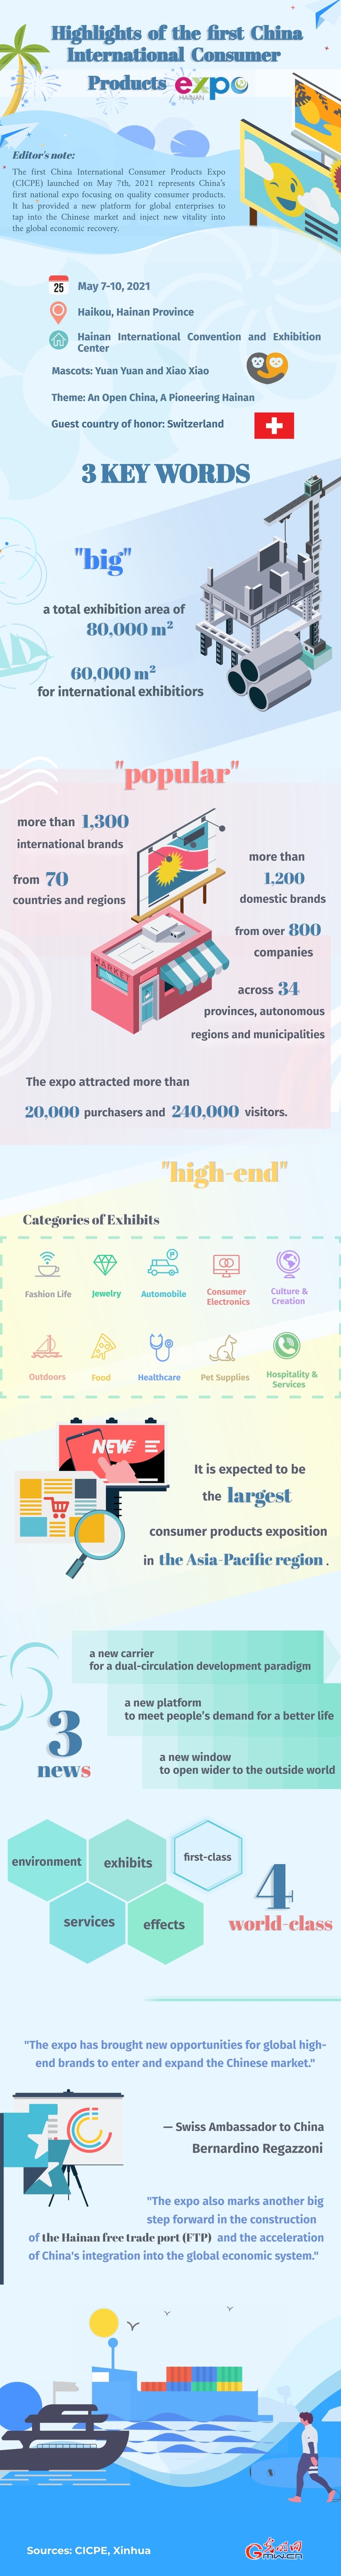 Infographic: highlights of the first China International Consumer Products Expo